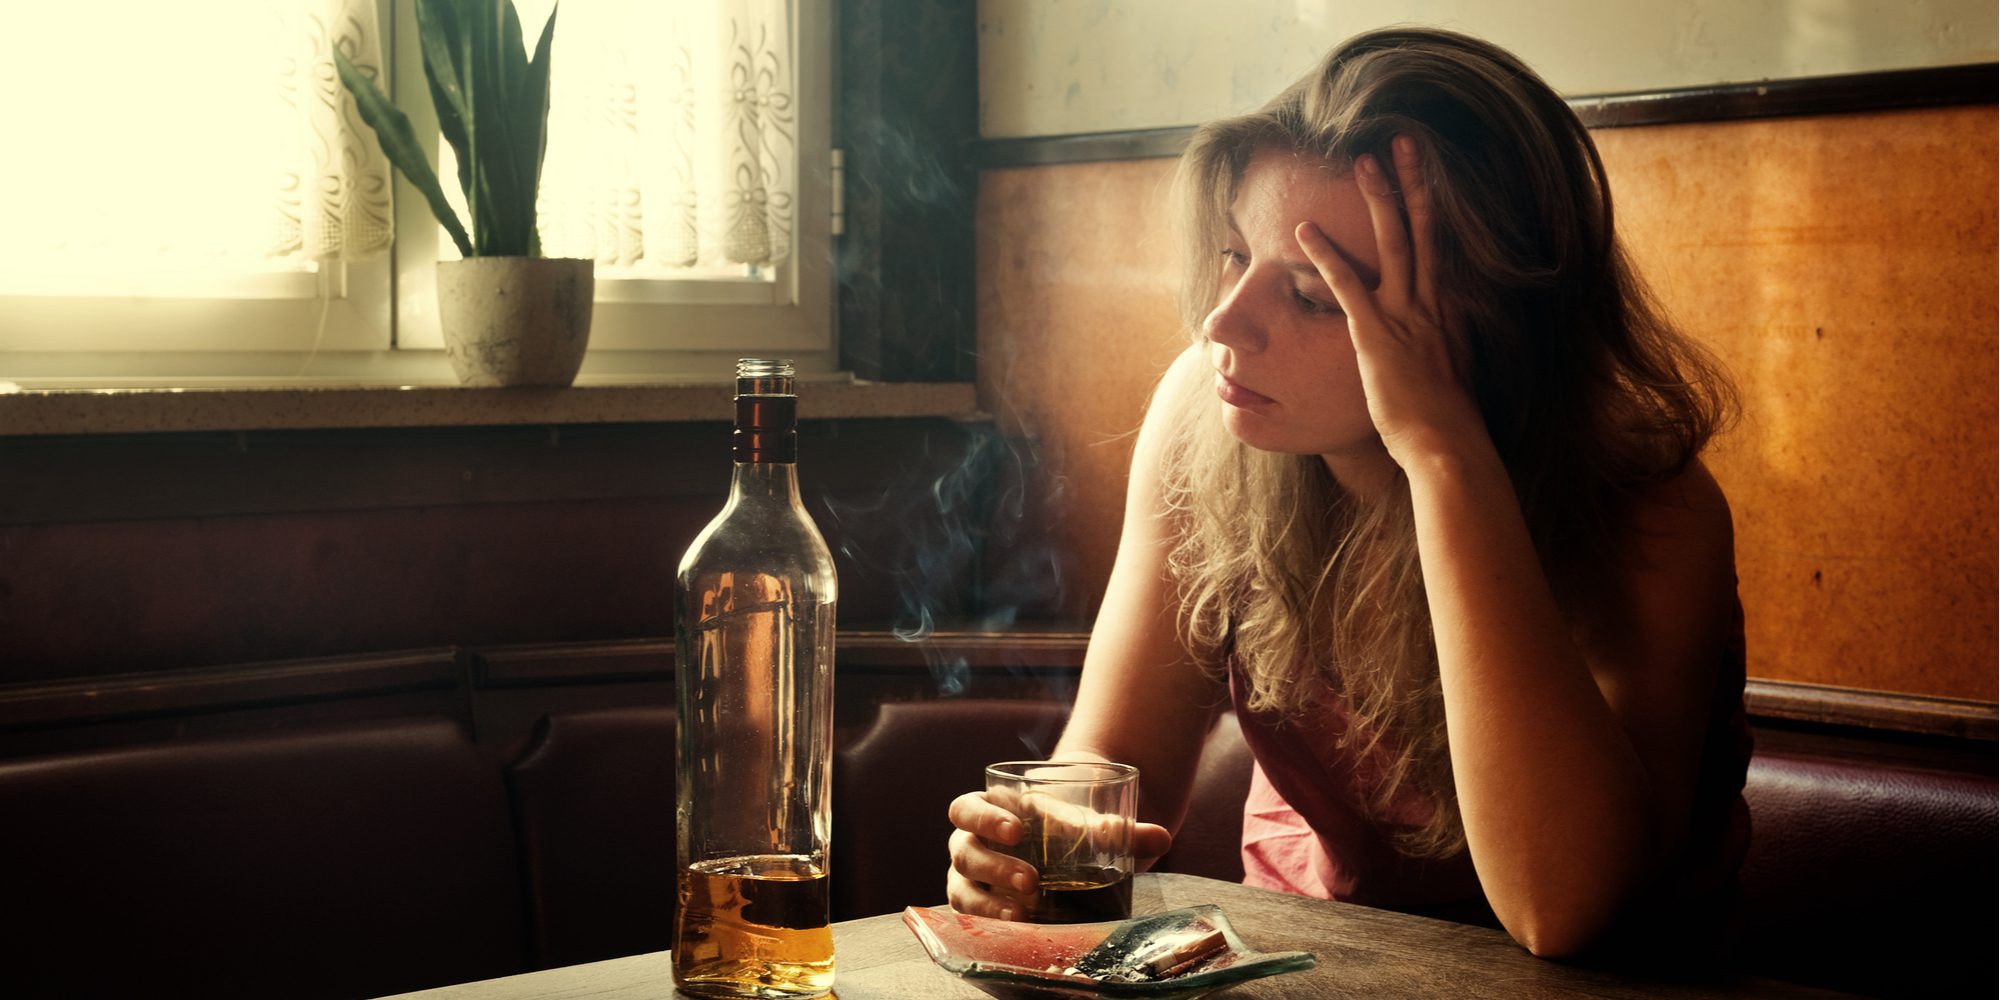 Women and Alcohol: What Causes Increased Health Risks?